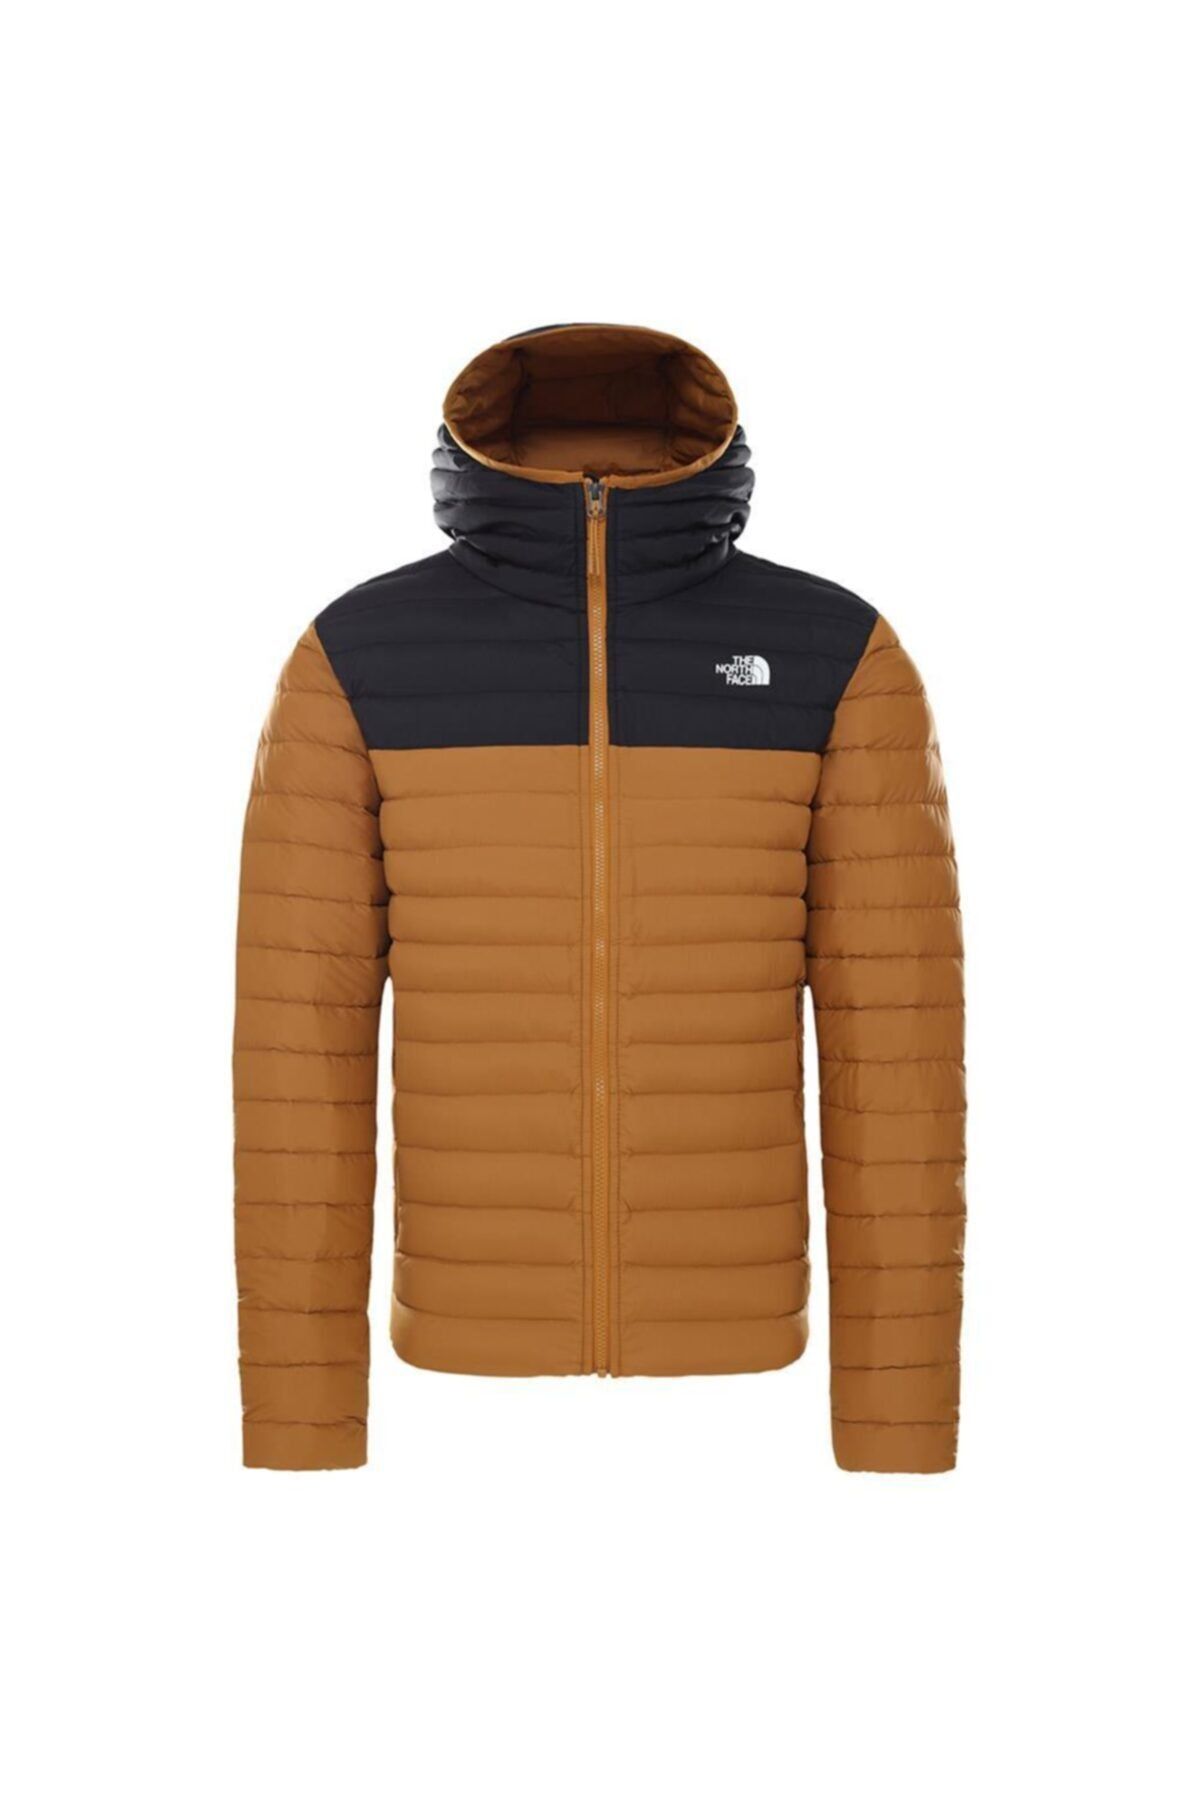 The North Face Stretch Down Hoodie Erkek Ceket - T93y55hfq